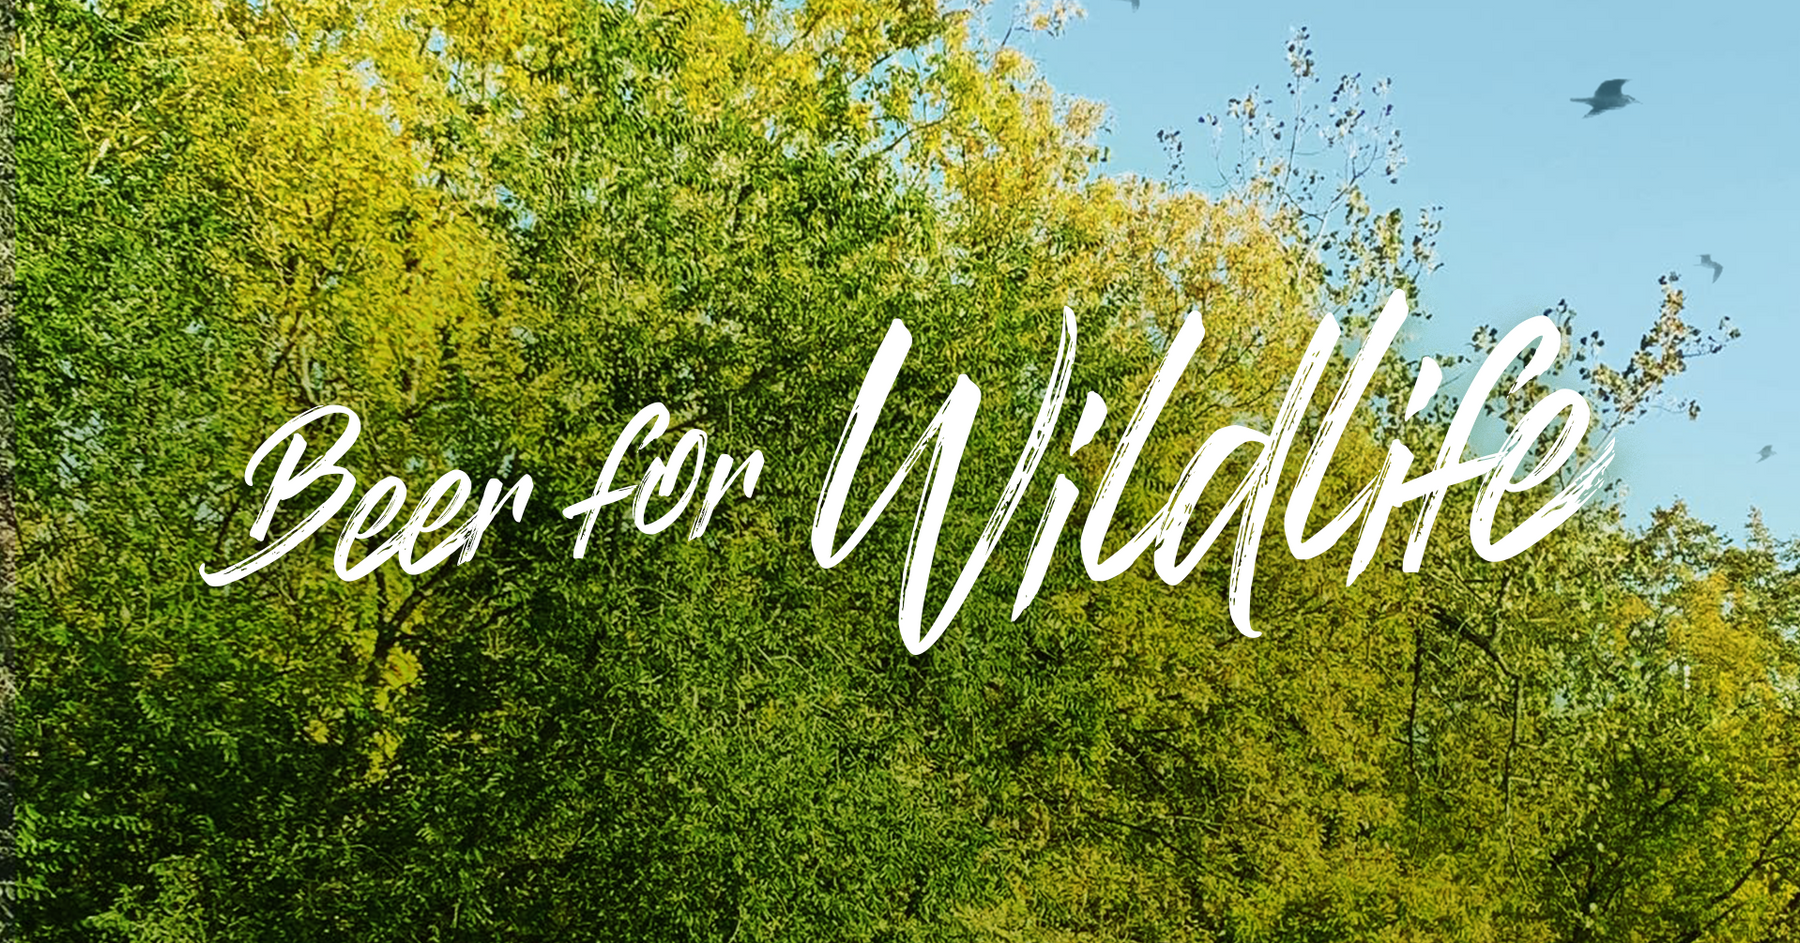 Beer for Wildlife - July 17 at The Beer Can!